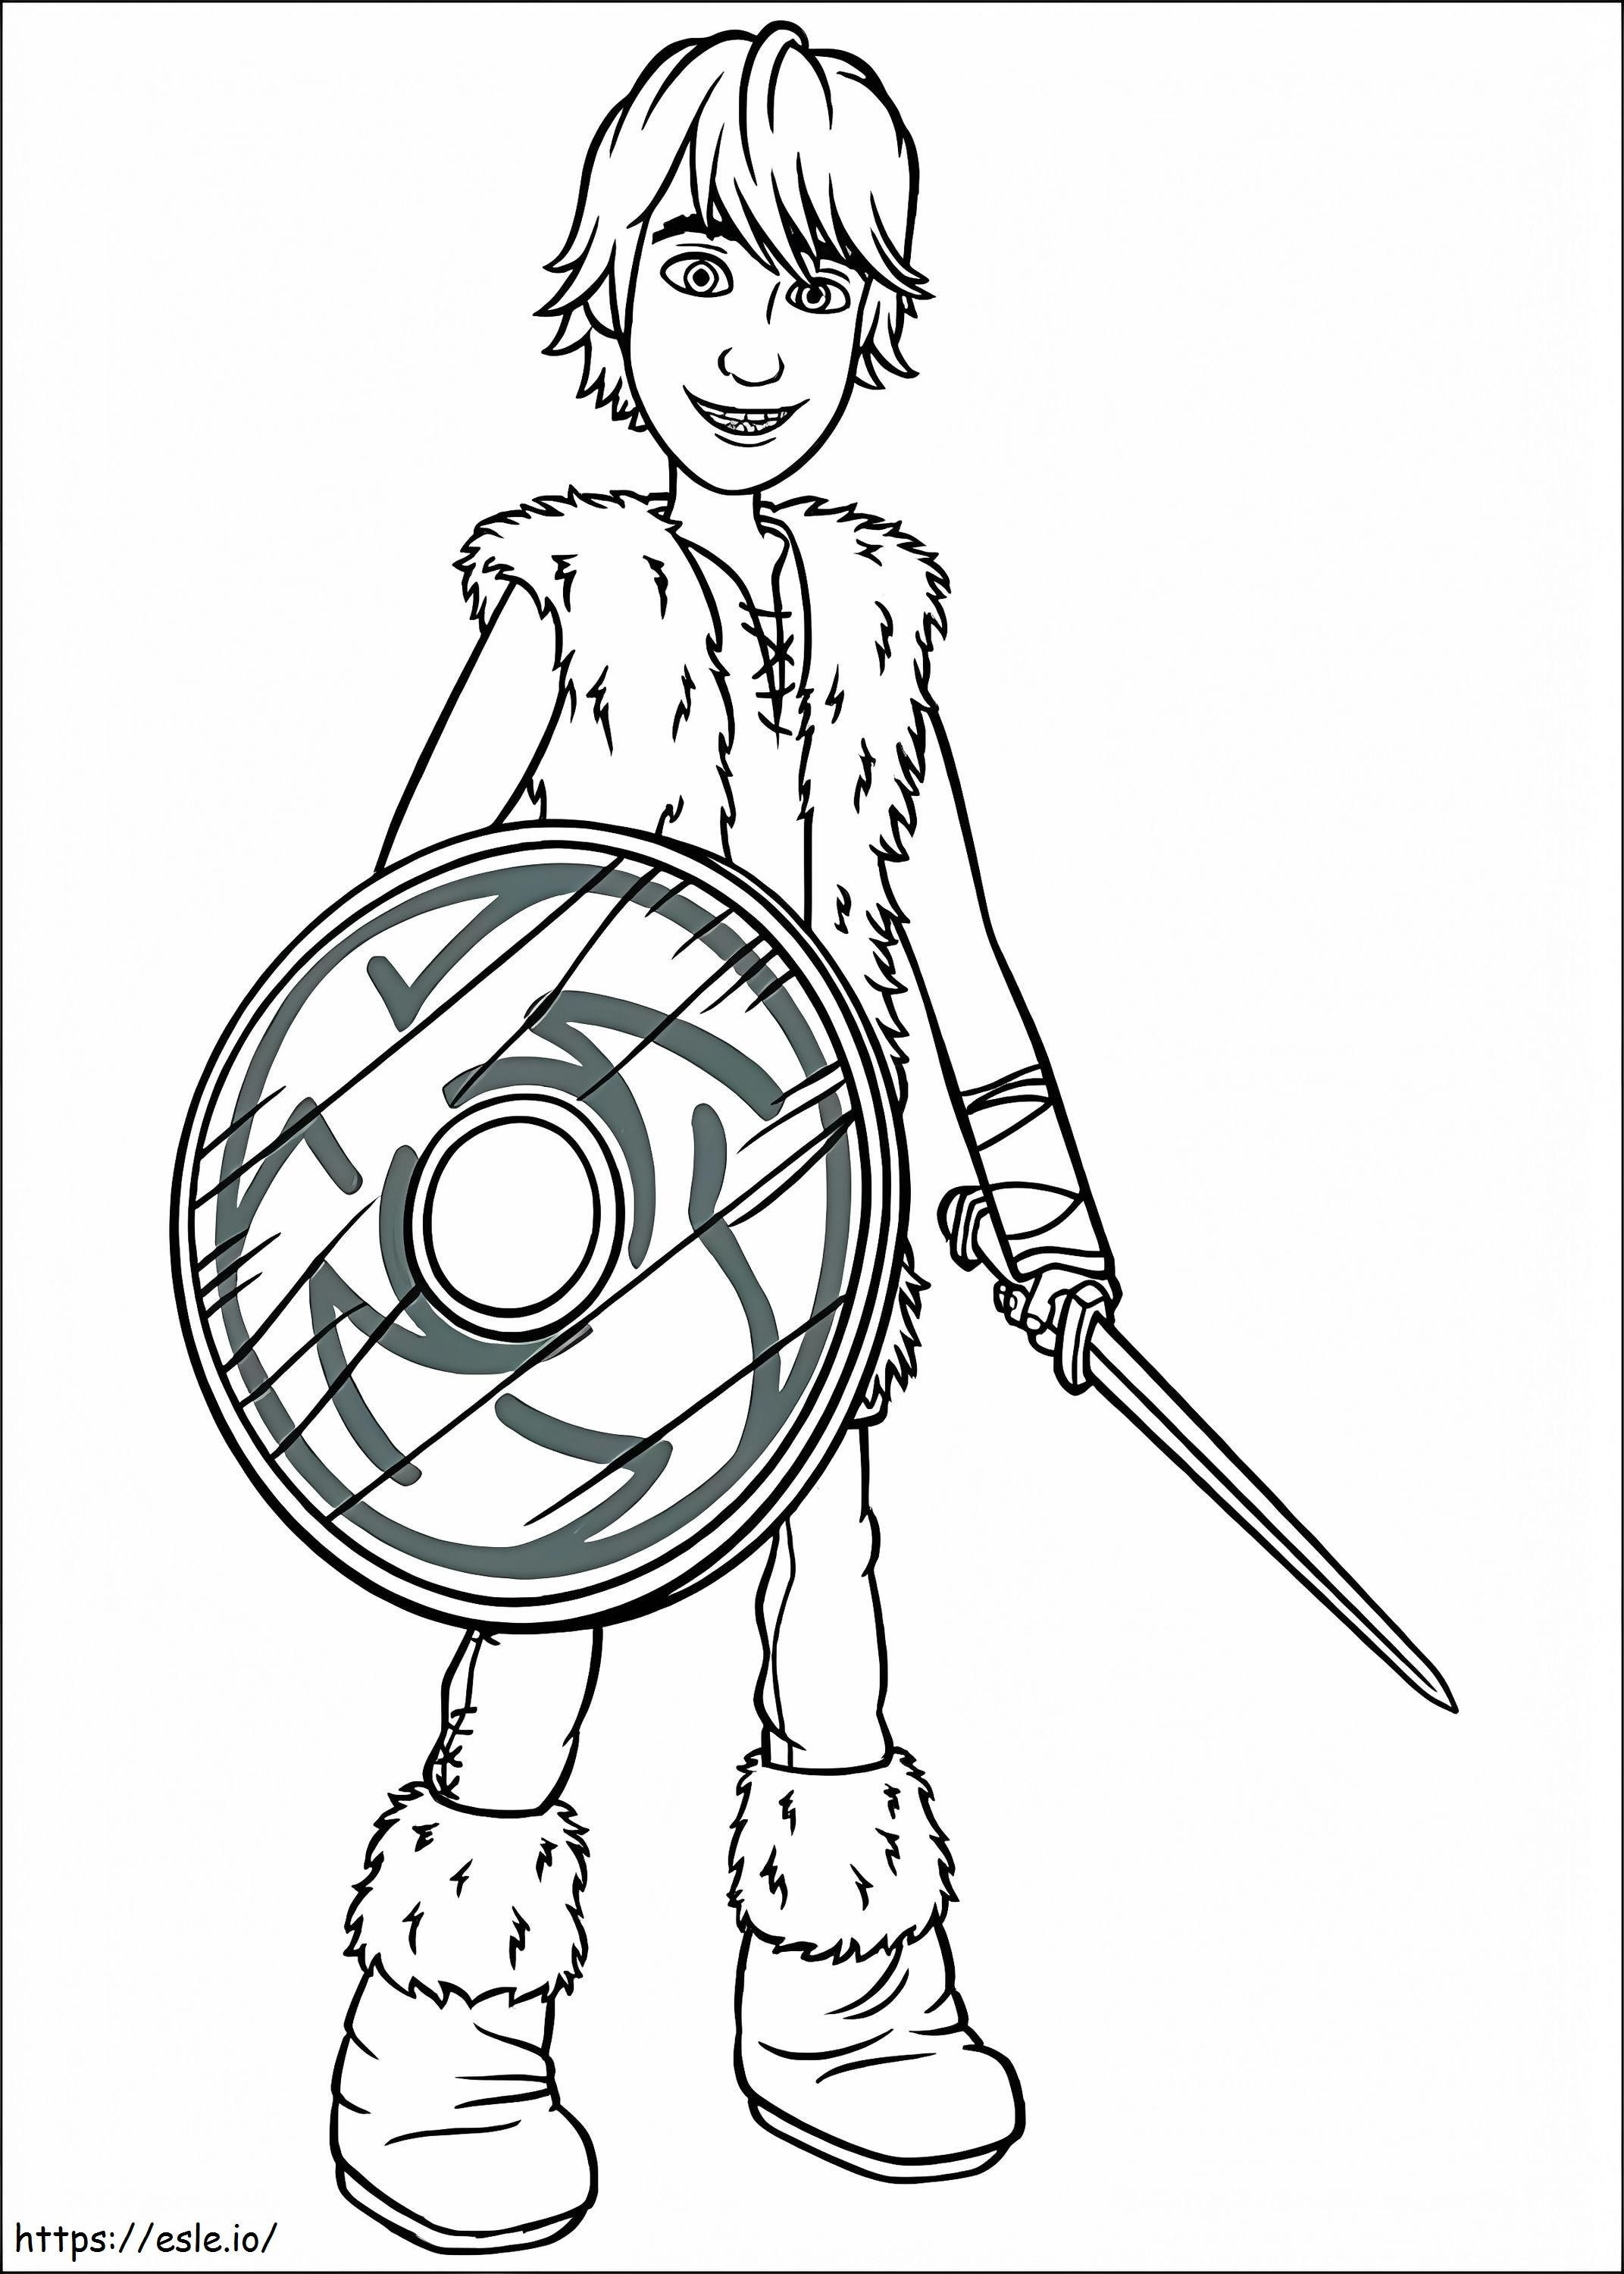 Hiccup The Fighter coloring page